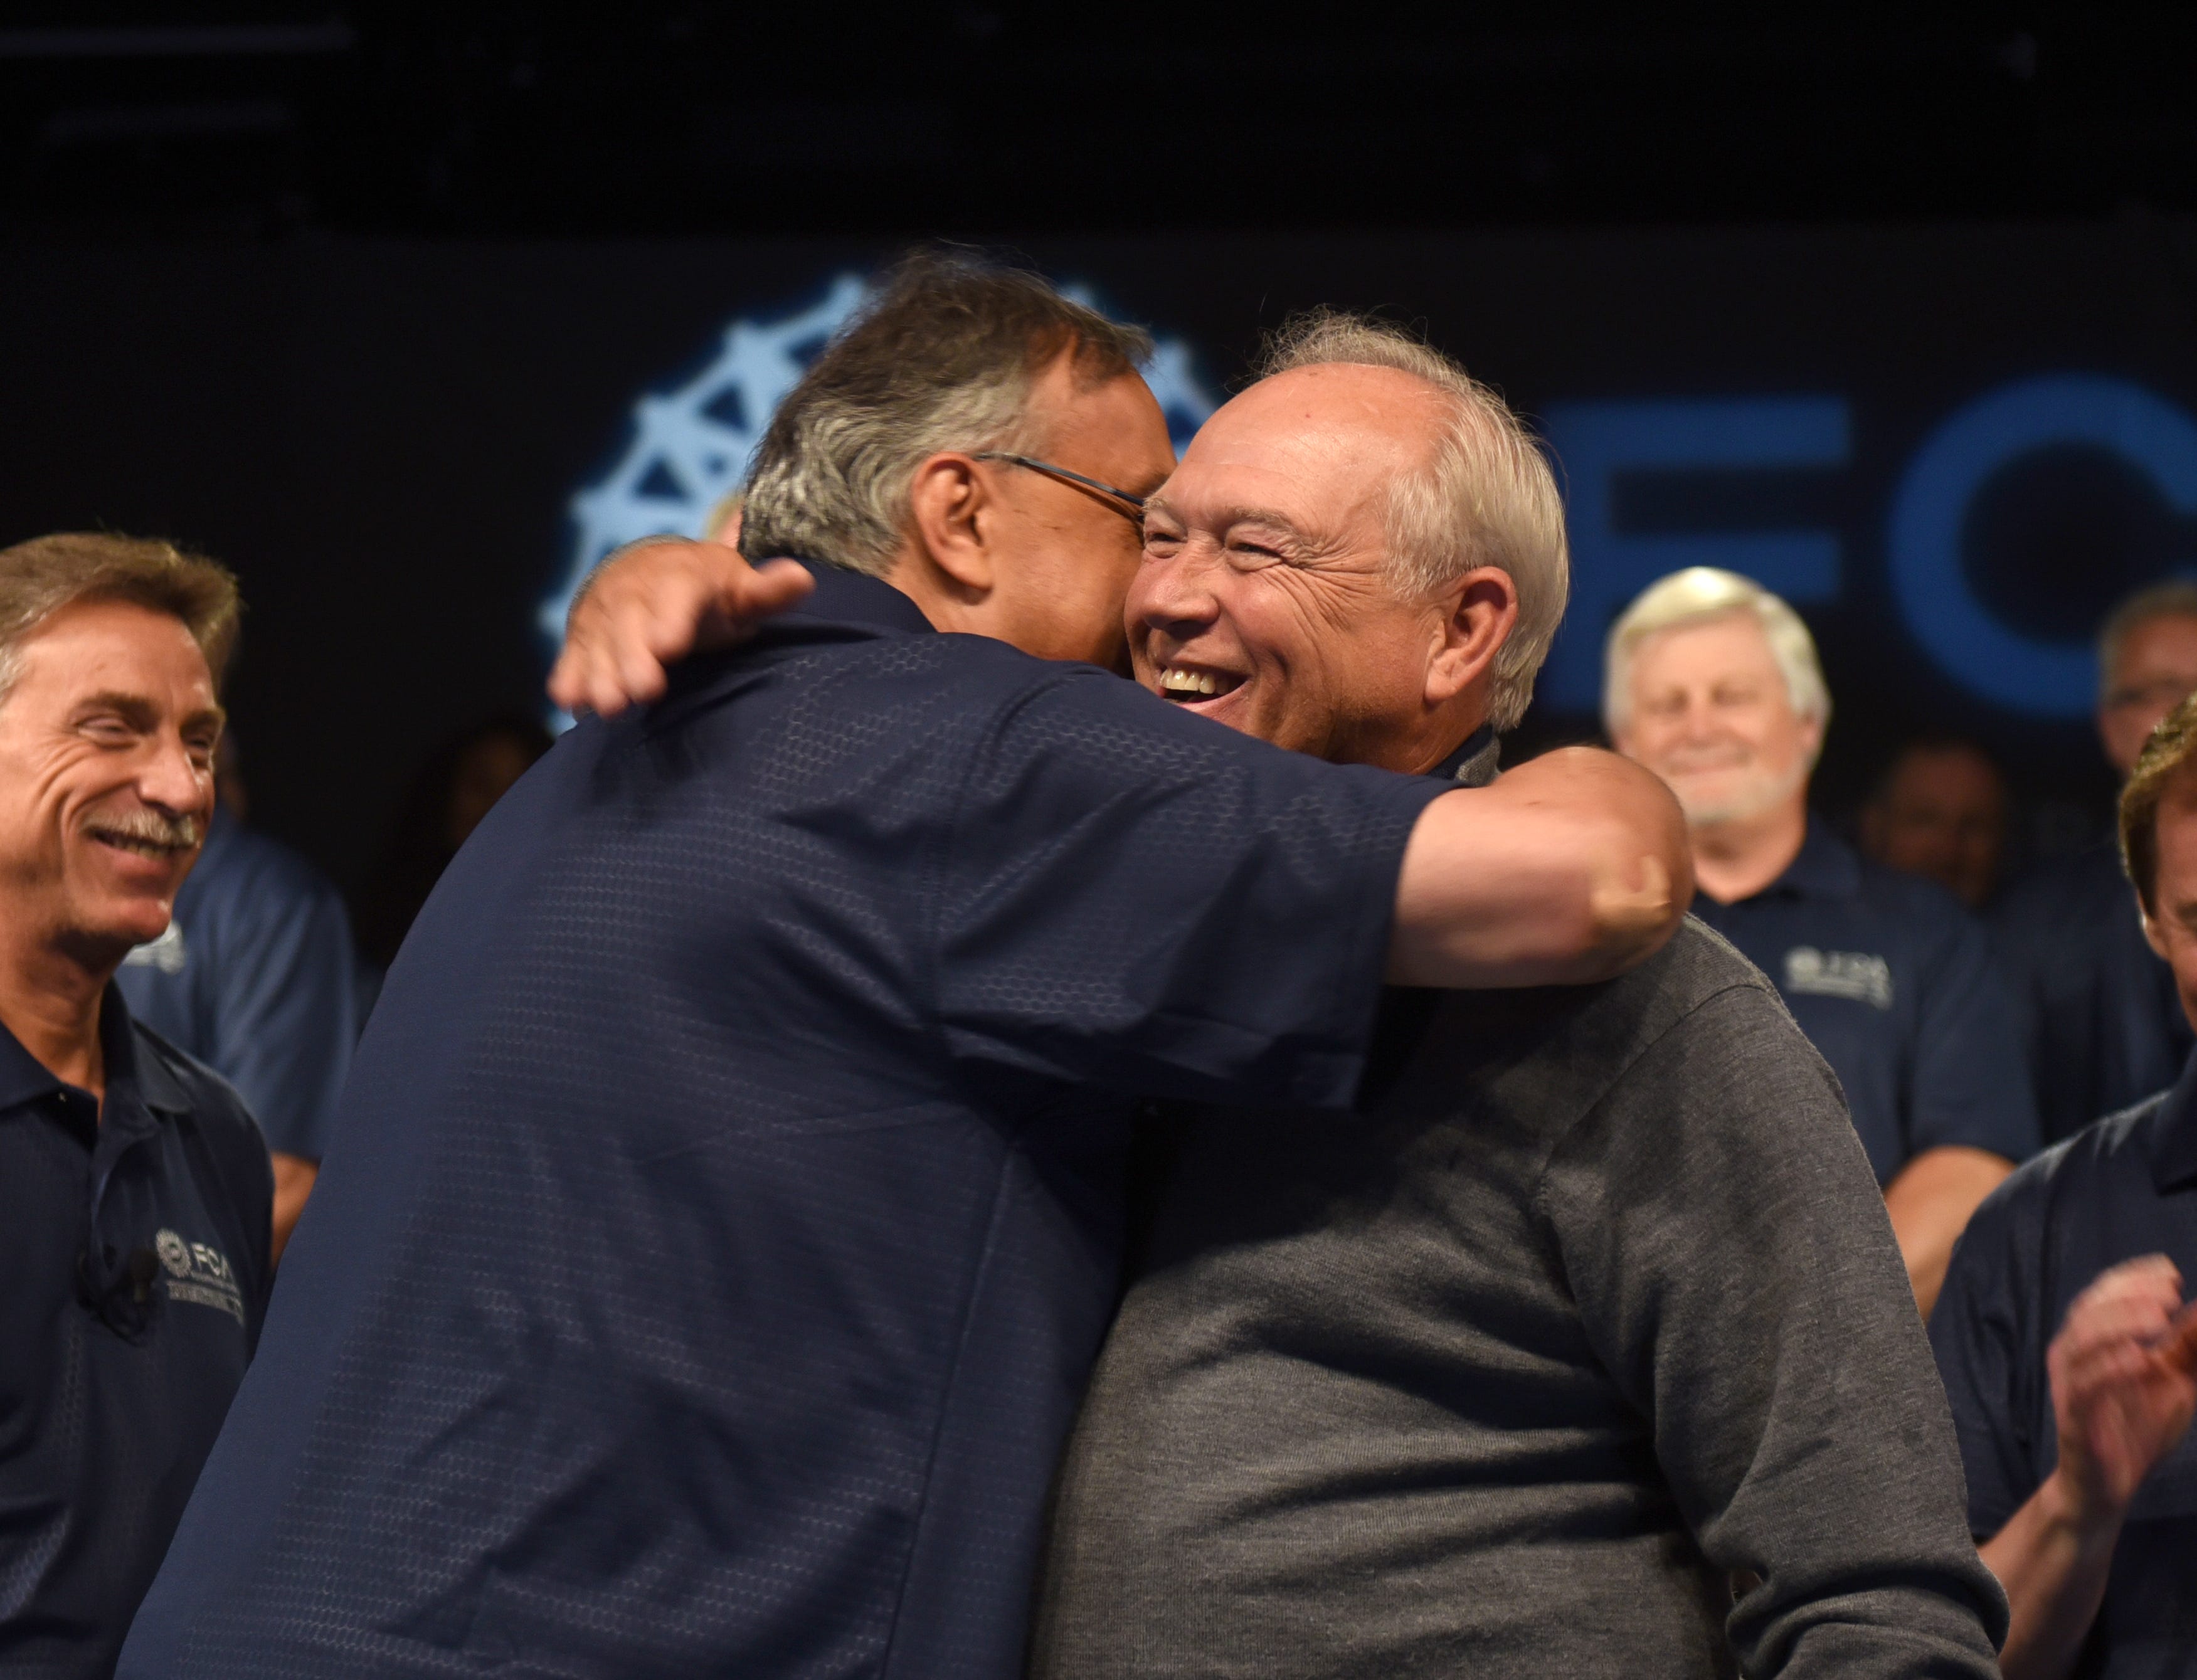 Fiat Chrysler CEO Sergio Marchionne, left, and UAW President Dennis Williams  embraced  at the start of contract talks in 2015. GM charges that Marchionne orchestrated a bribery conspiracy to corrupt three rounds of bargaining with the UAW in an effort to harm and take over Detroit's biggest automaker.